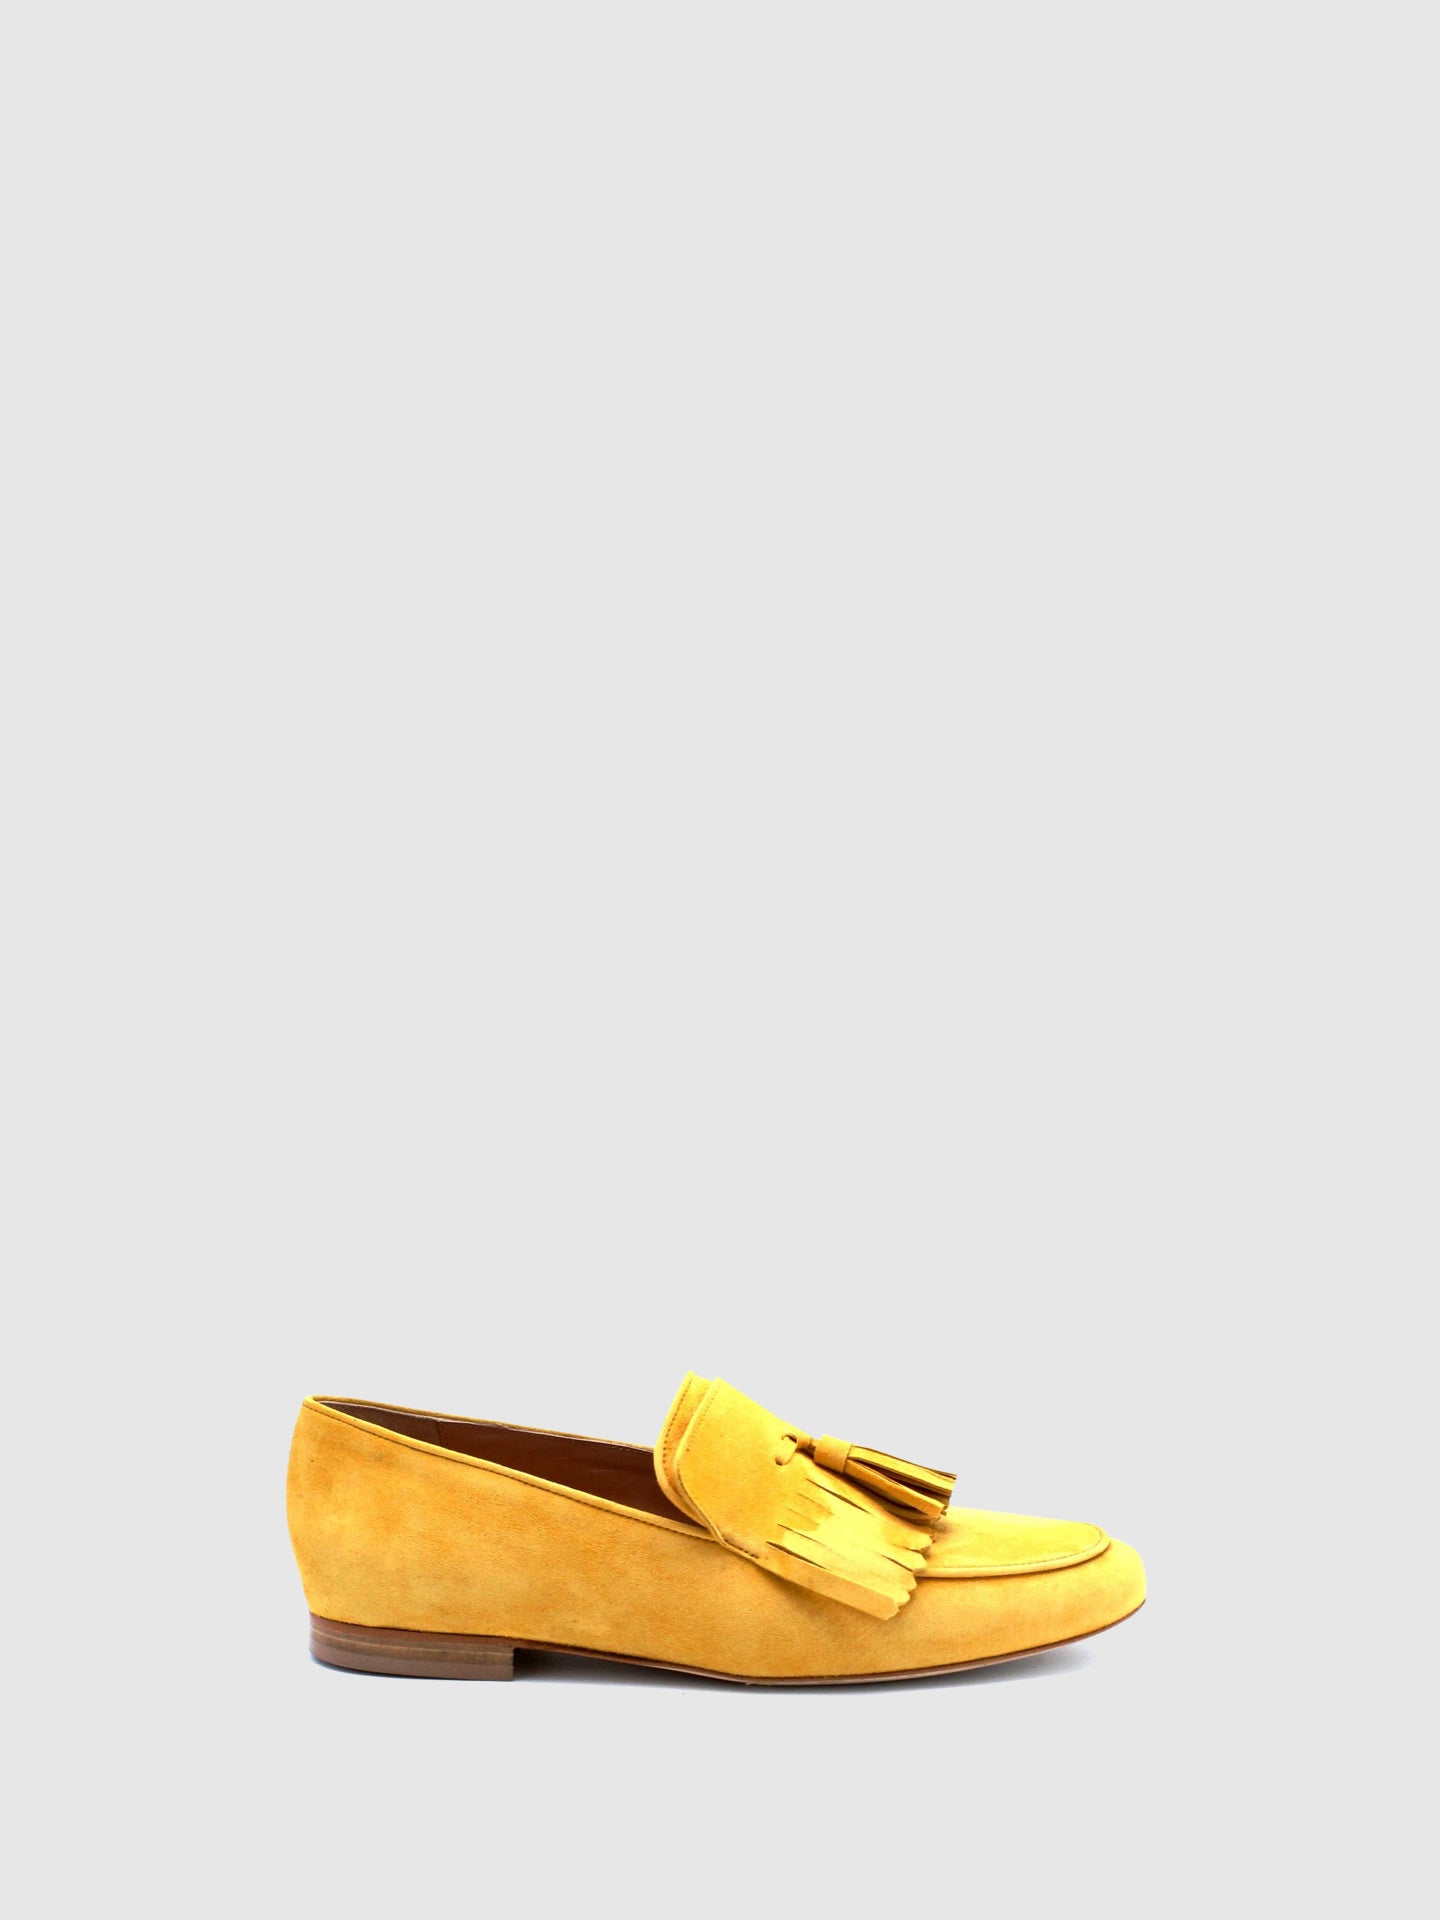 JJ Heitor Appliqués Loafers C03L3 Suede Yellow